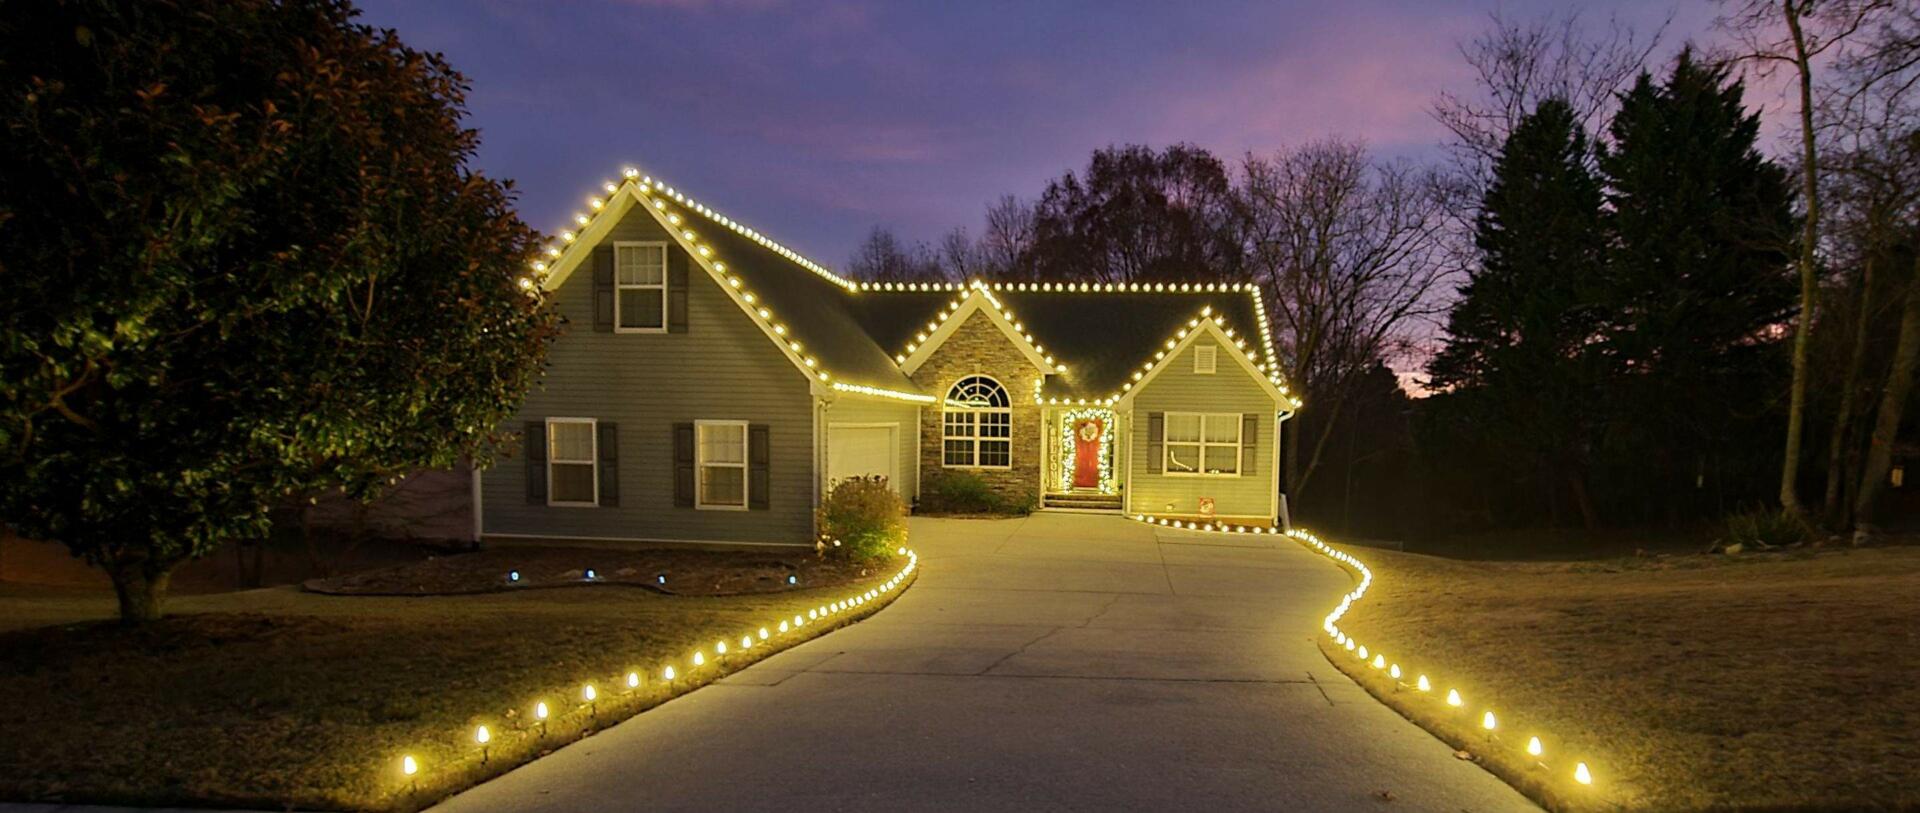 5 Outdoor Lighting Ideas to Illuminate Your Home’s Exterior